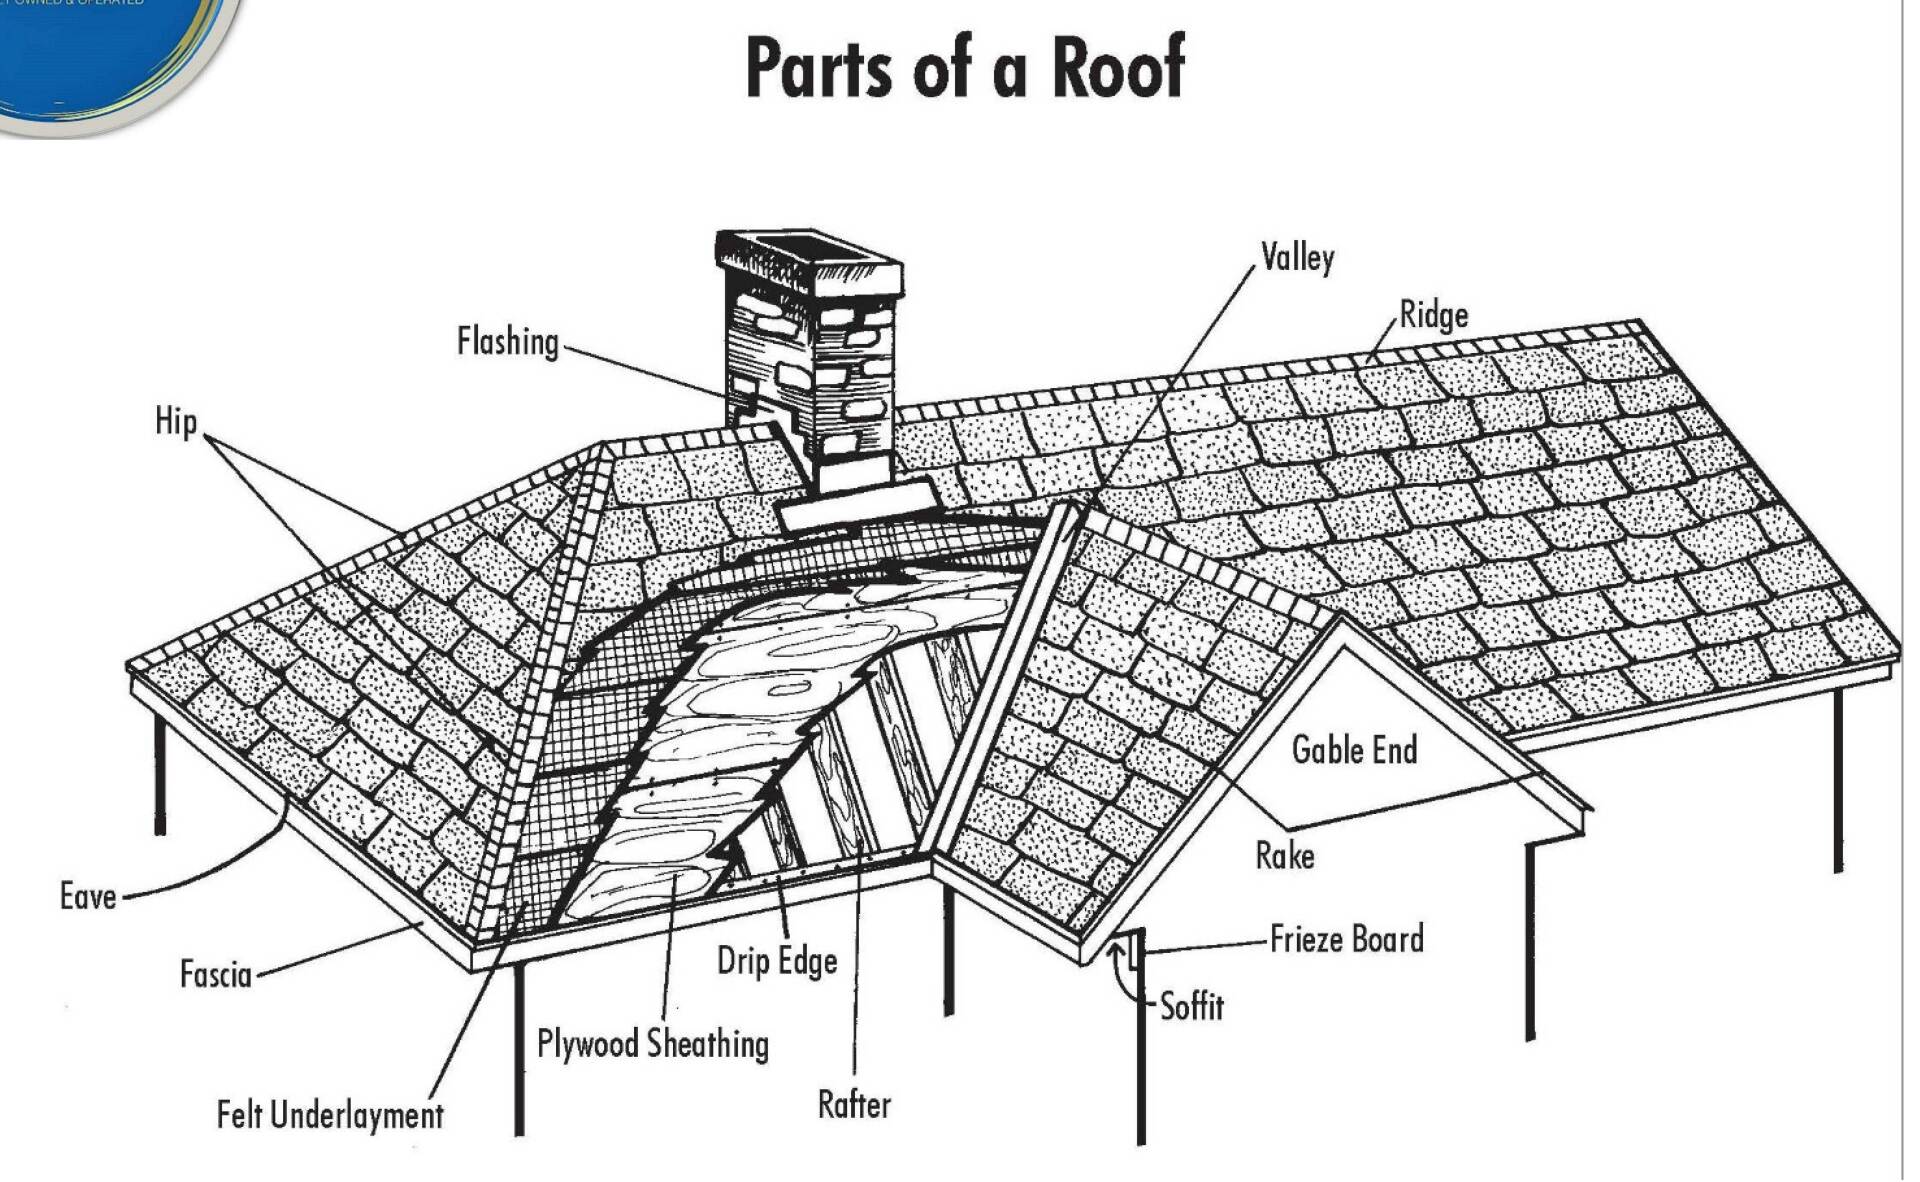 One of the best roofing companies in Maryland